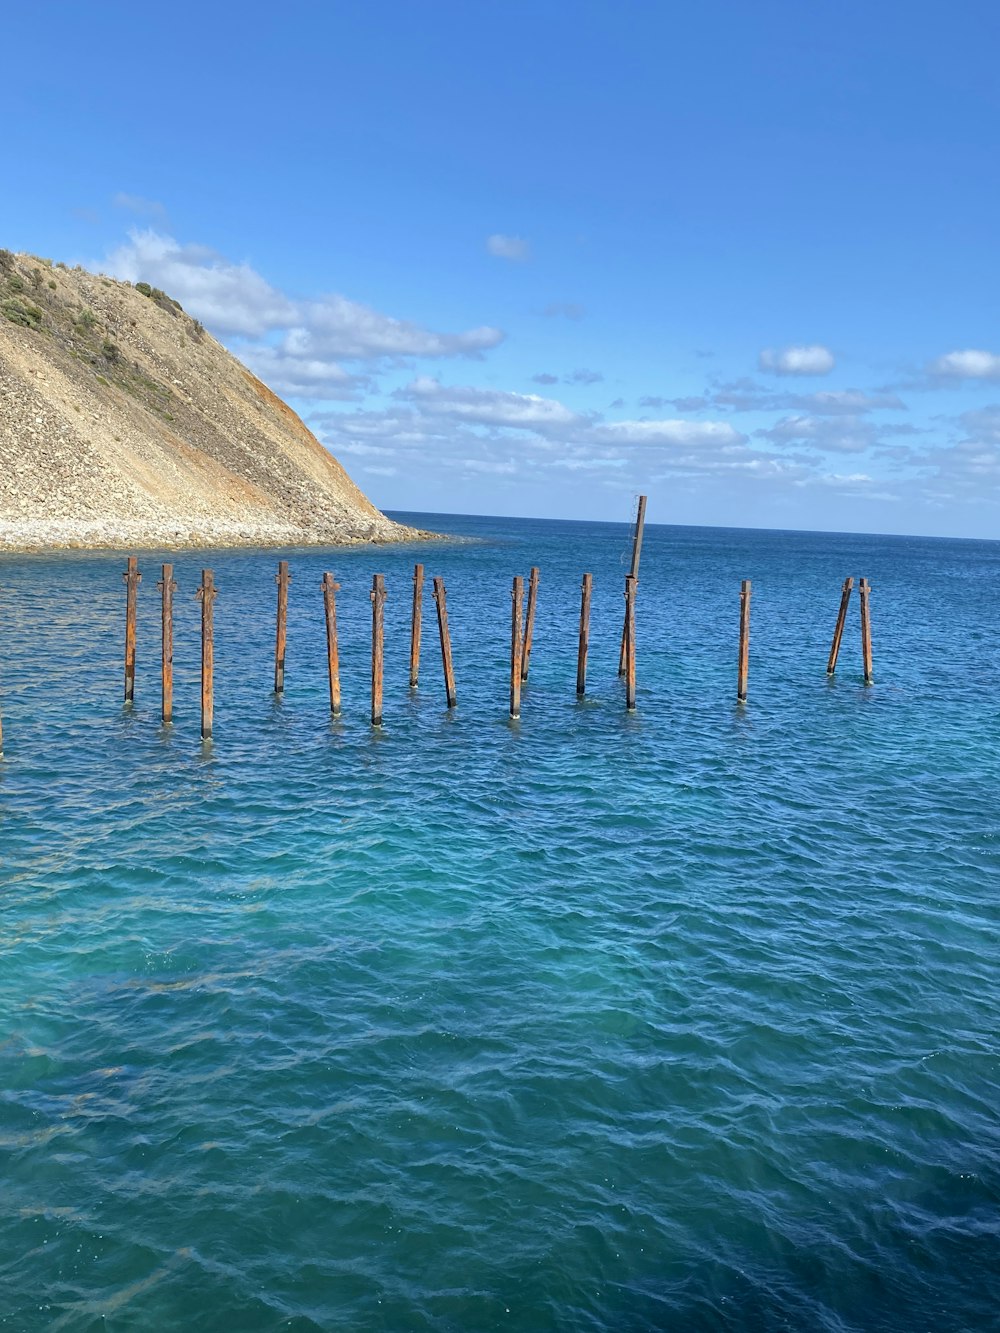 a group of wooden poles in the water